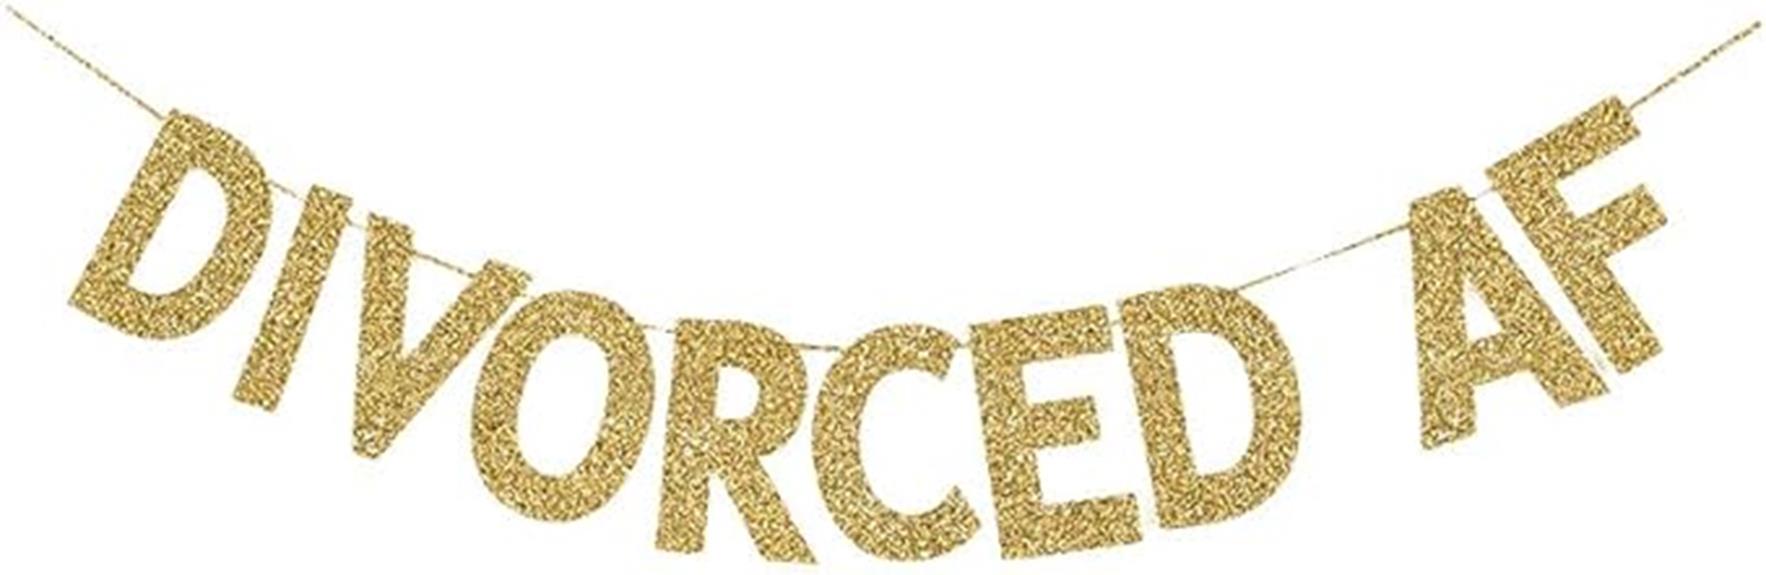 divorce party gold sign